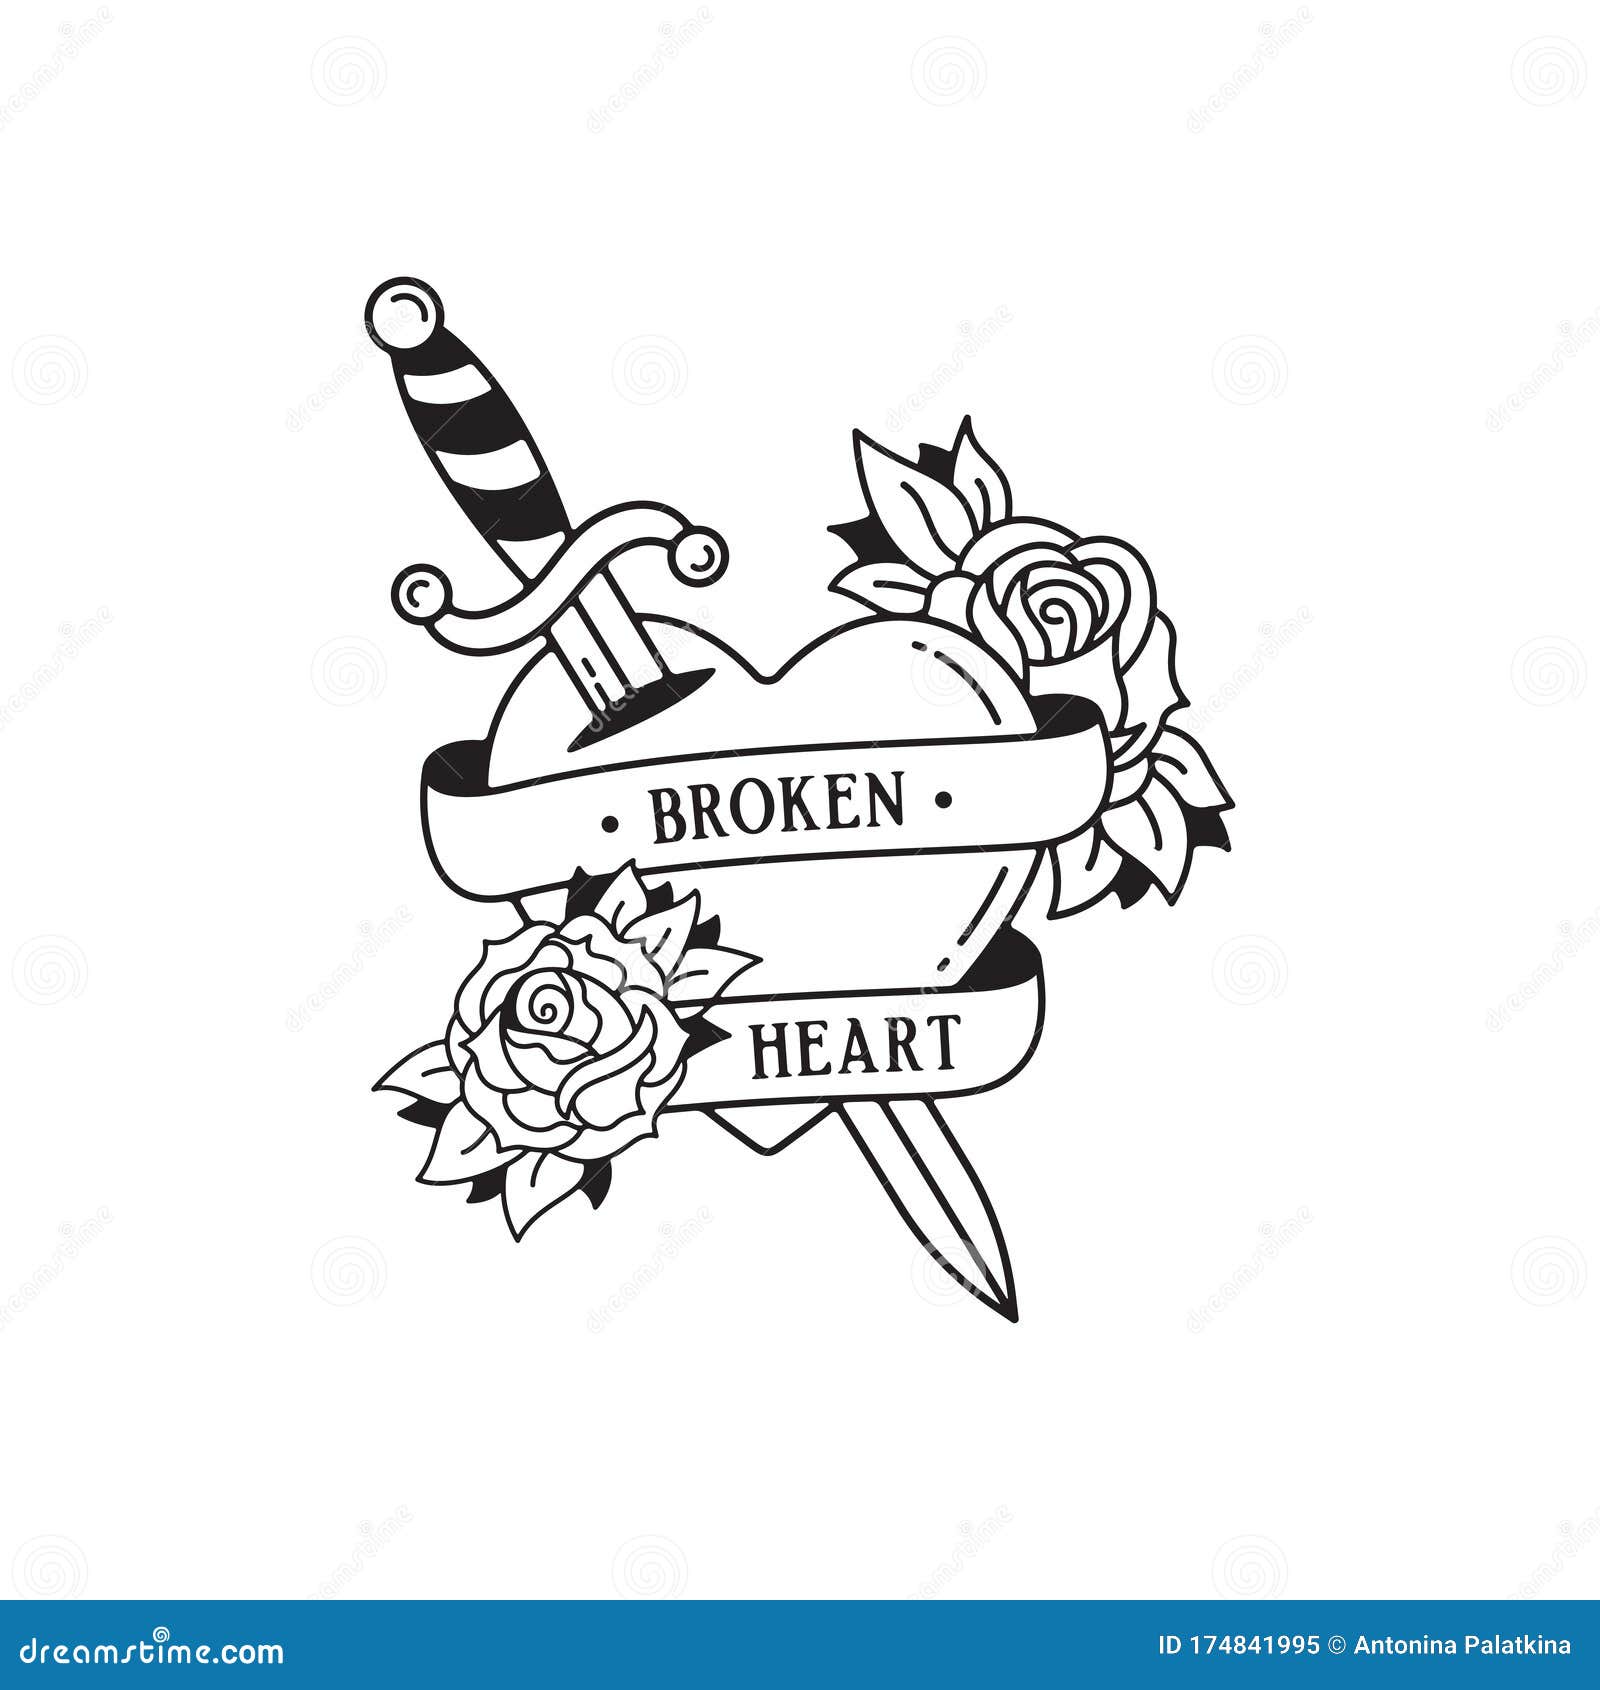 Old School Tattoo Emblem Label with Dagger Rose Heart Symbols and Wording Broken  Heart. Traditional Tattooing Style Ink Stock Illustration - Illustration of  doodle, clipart: 174841995